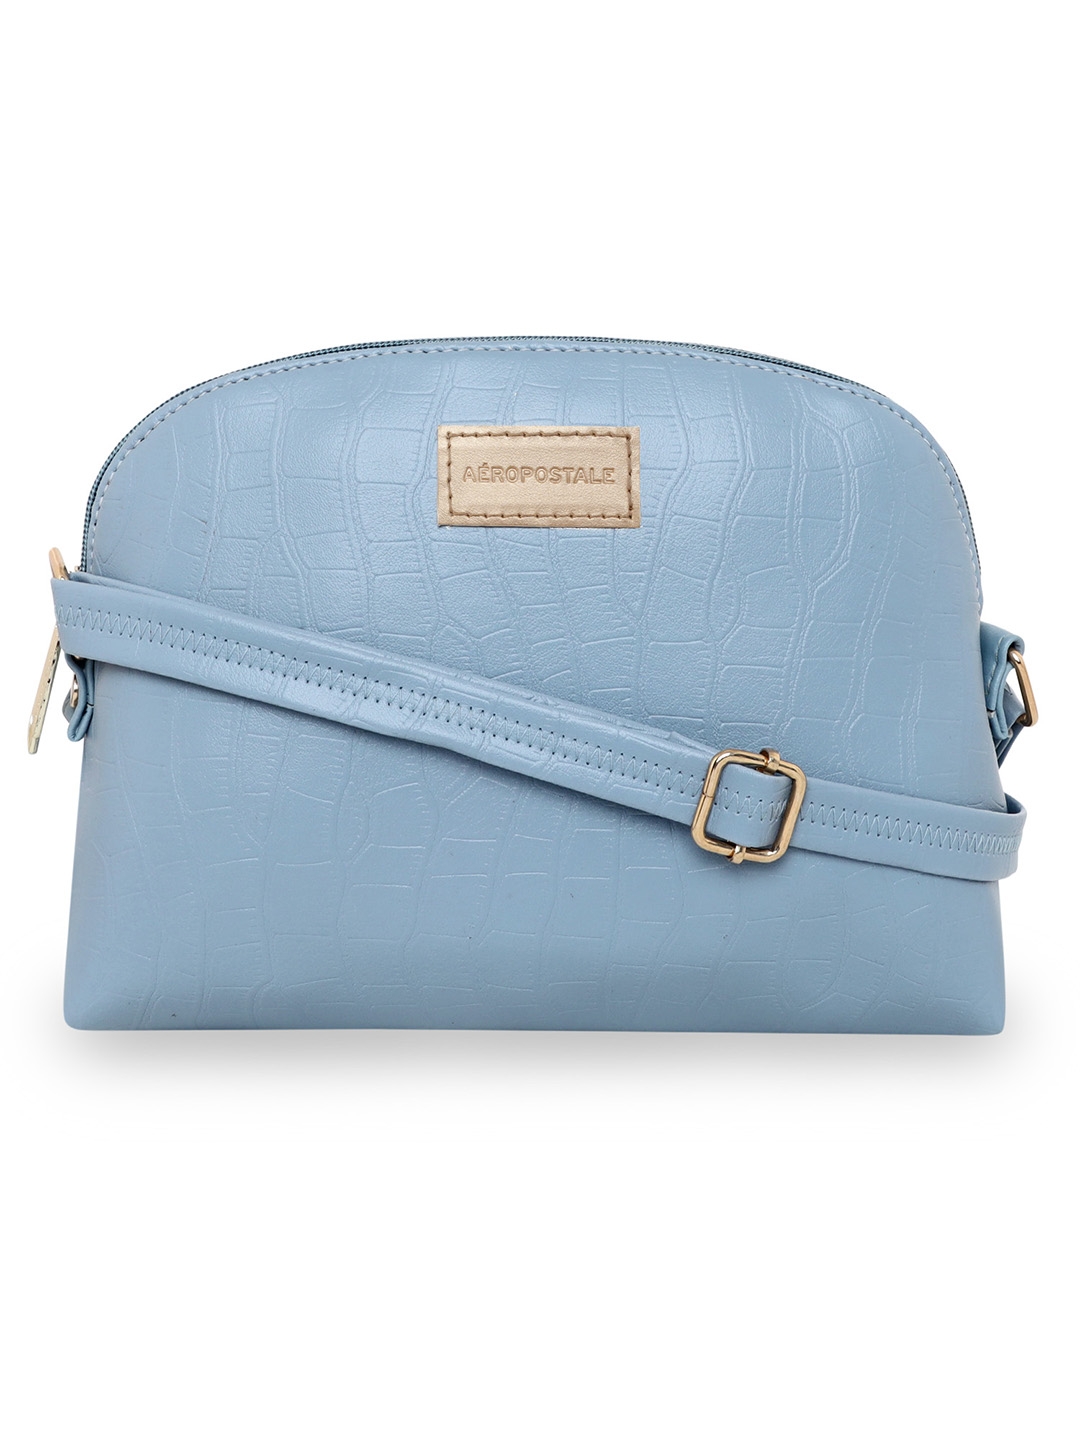 Aeropostale Textured Kylie PU Sling Bag with non-detachable strap (Light Blue)